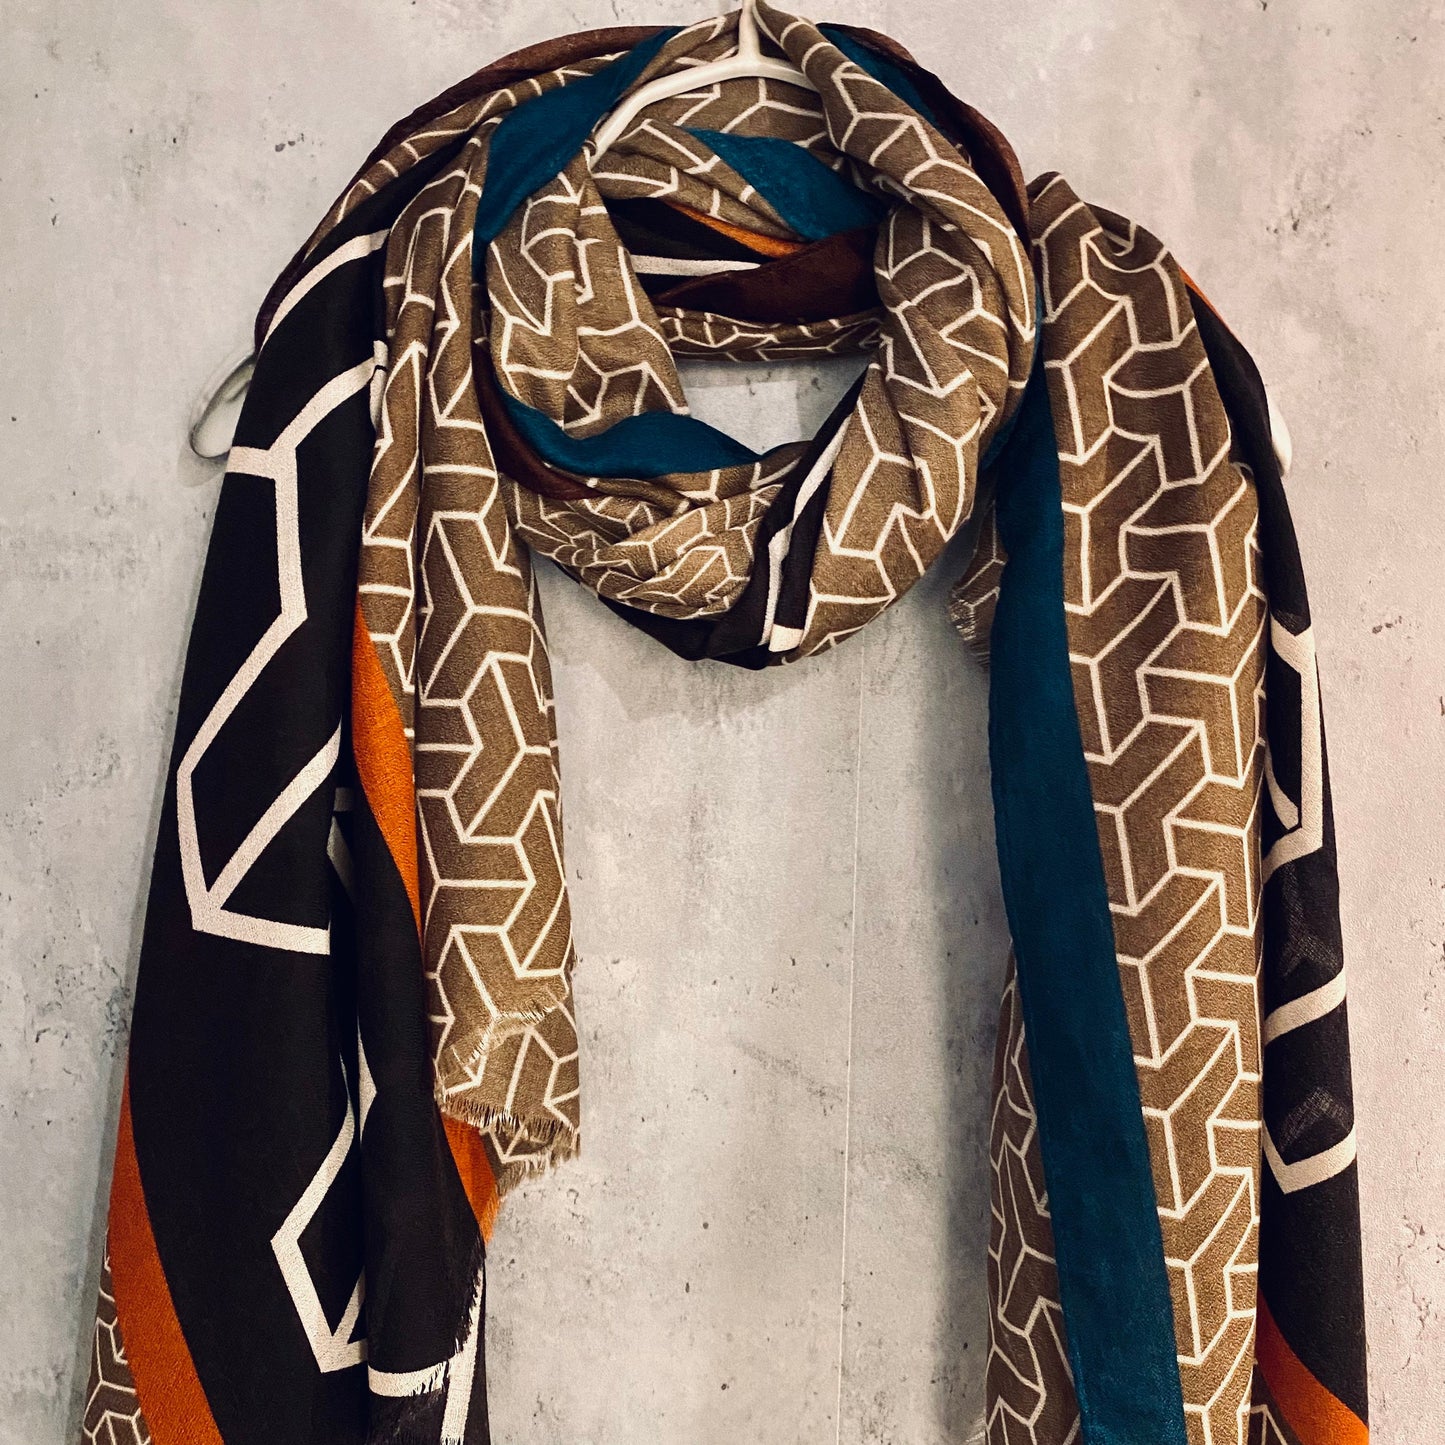 3D Geometric Pattern With Orange Trim Light Brown Cotton Scarf/Summer Autumn Scarf/Gifts For Her Birthday Christmas/Gifts For Mom/UK Seller